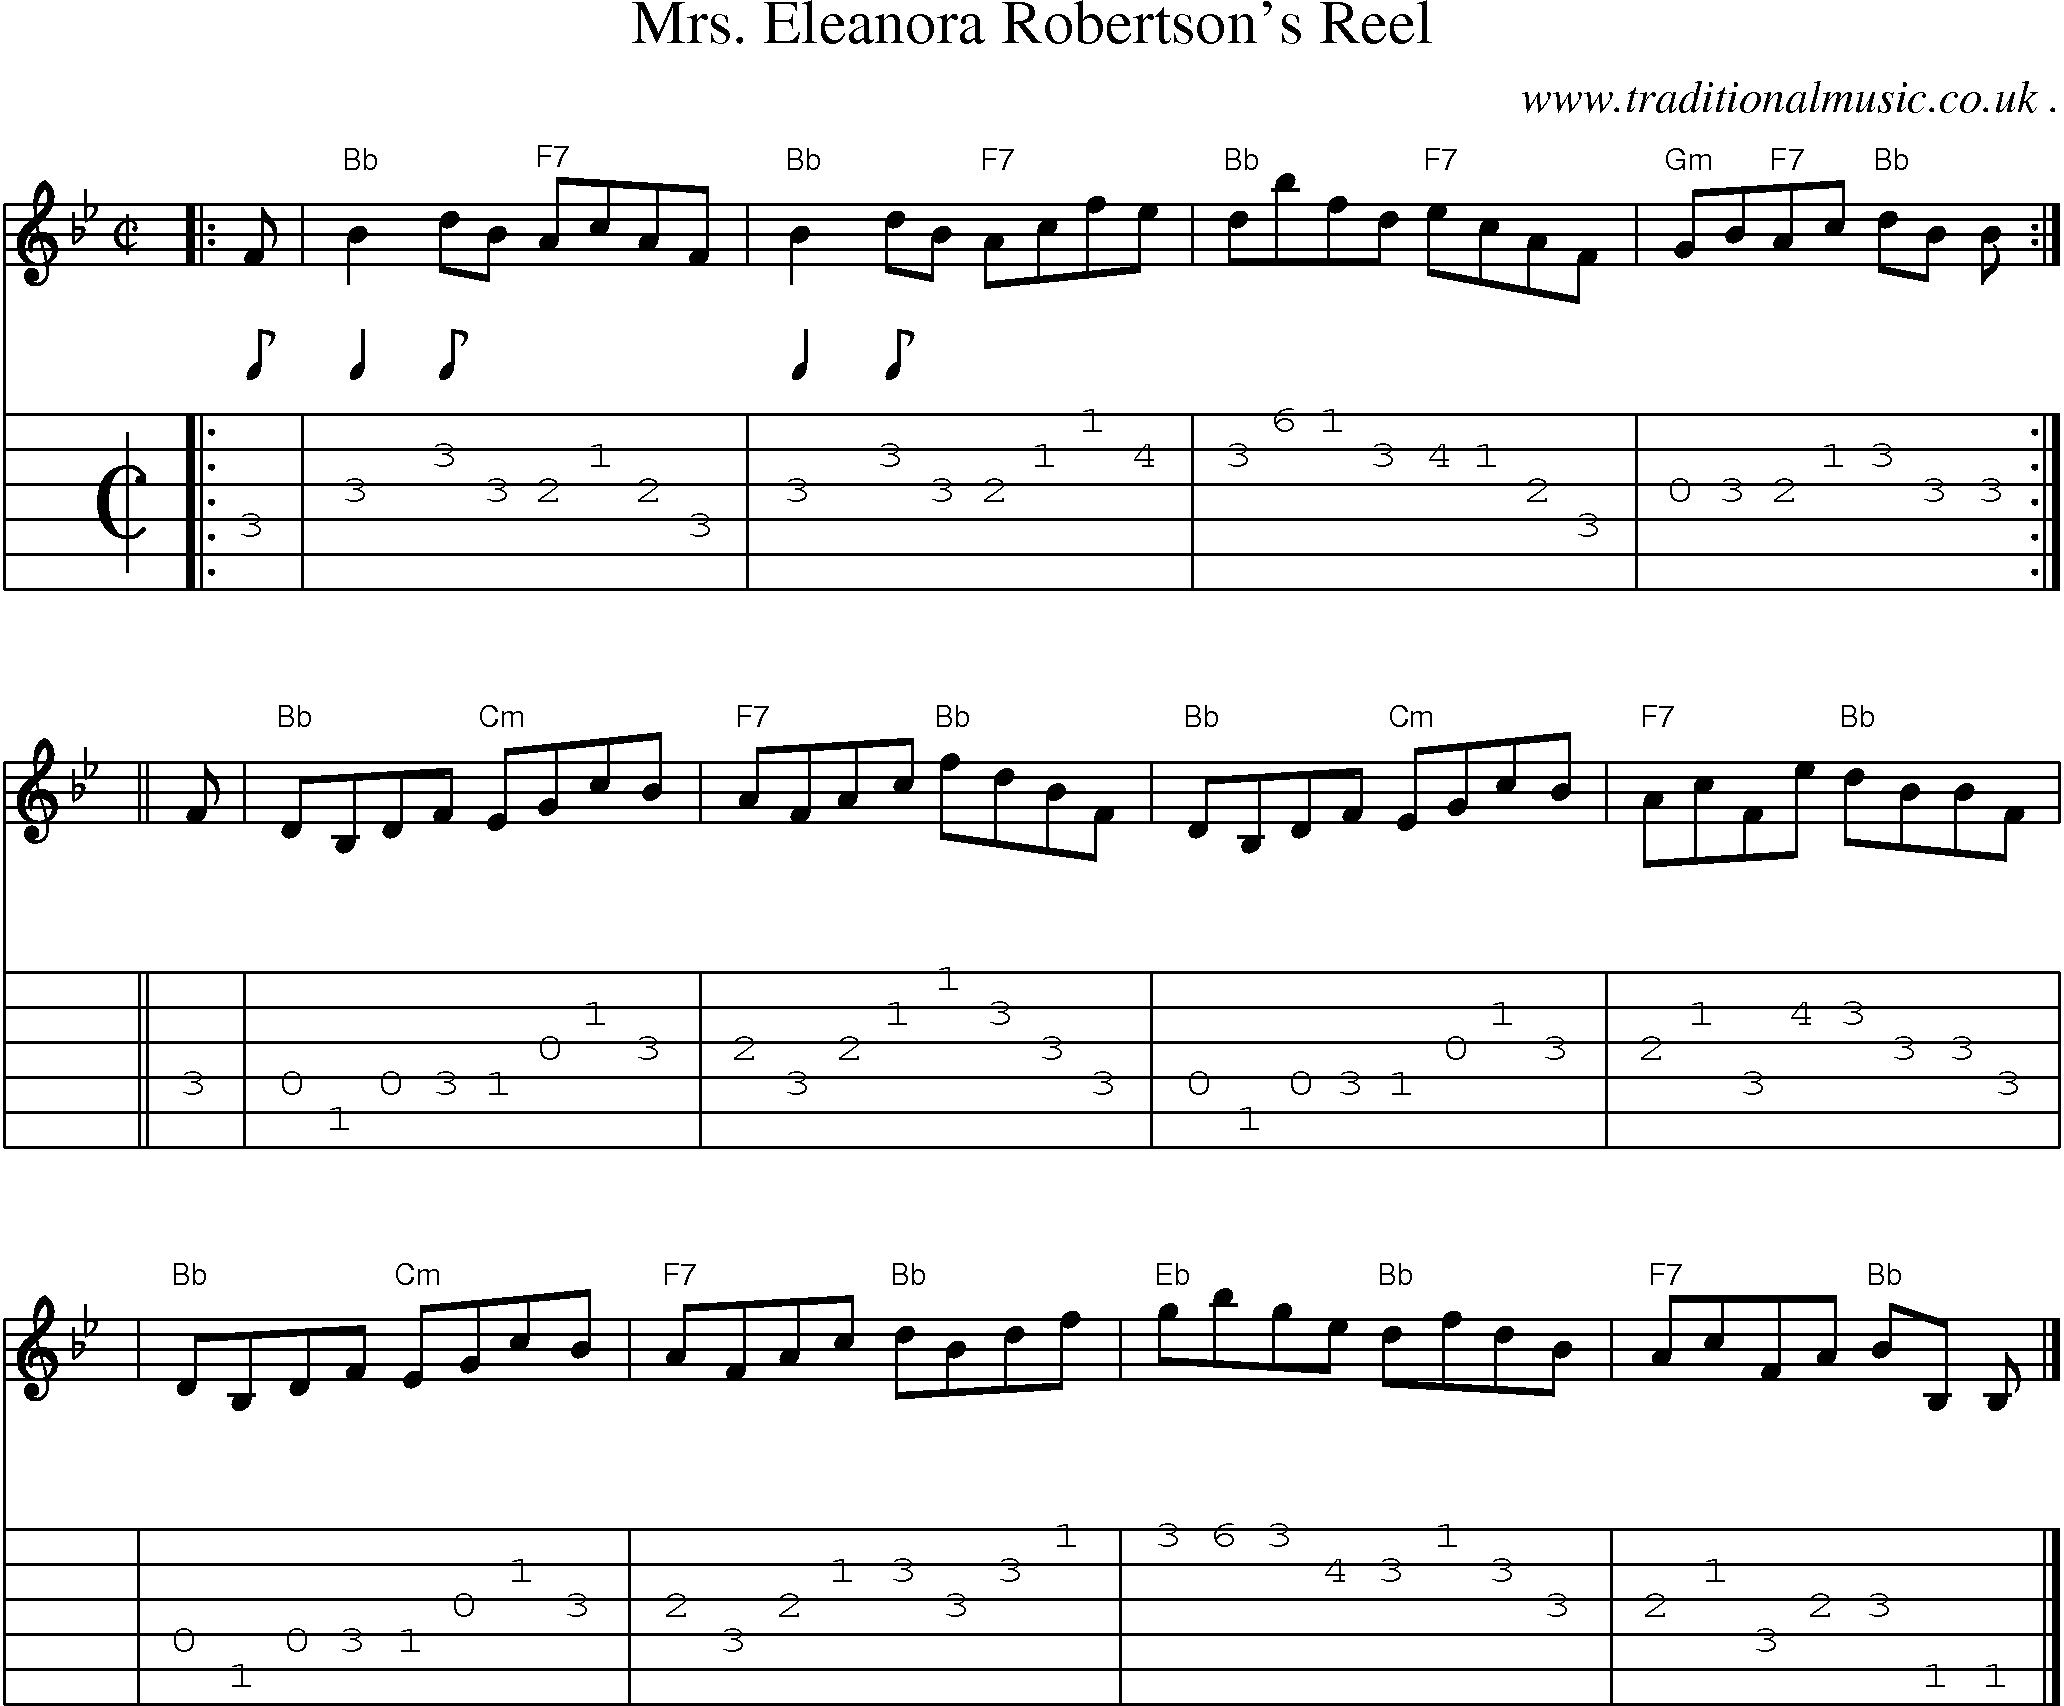 Sheet-music  score, Chords and Guitar Tabs for Mrs Eleanora Robertsons Reel